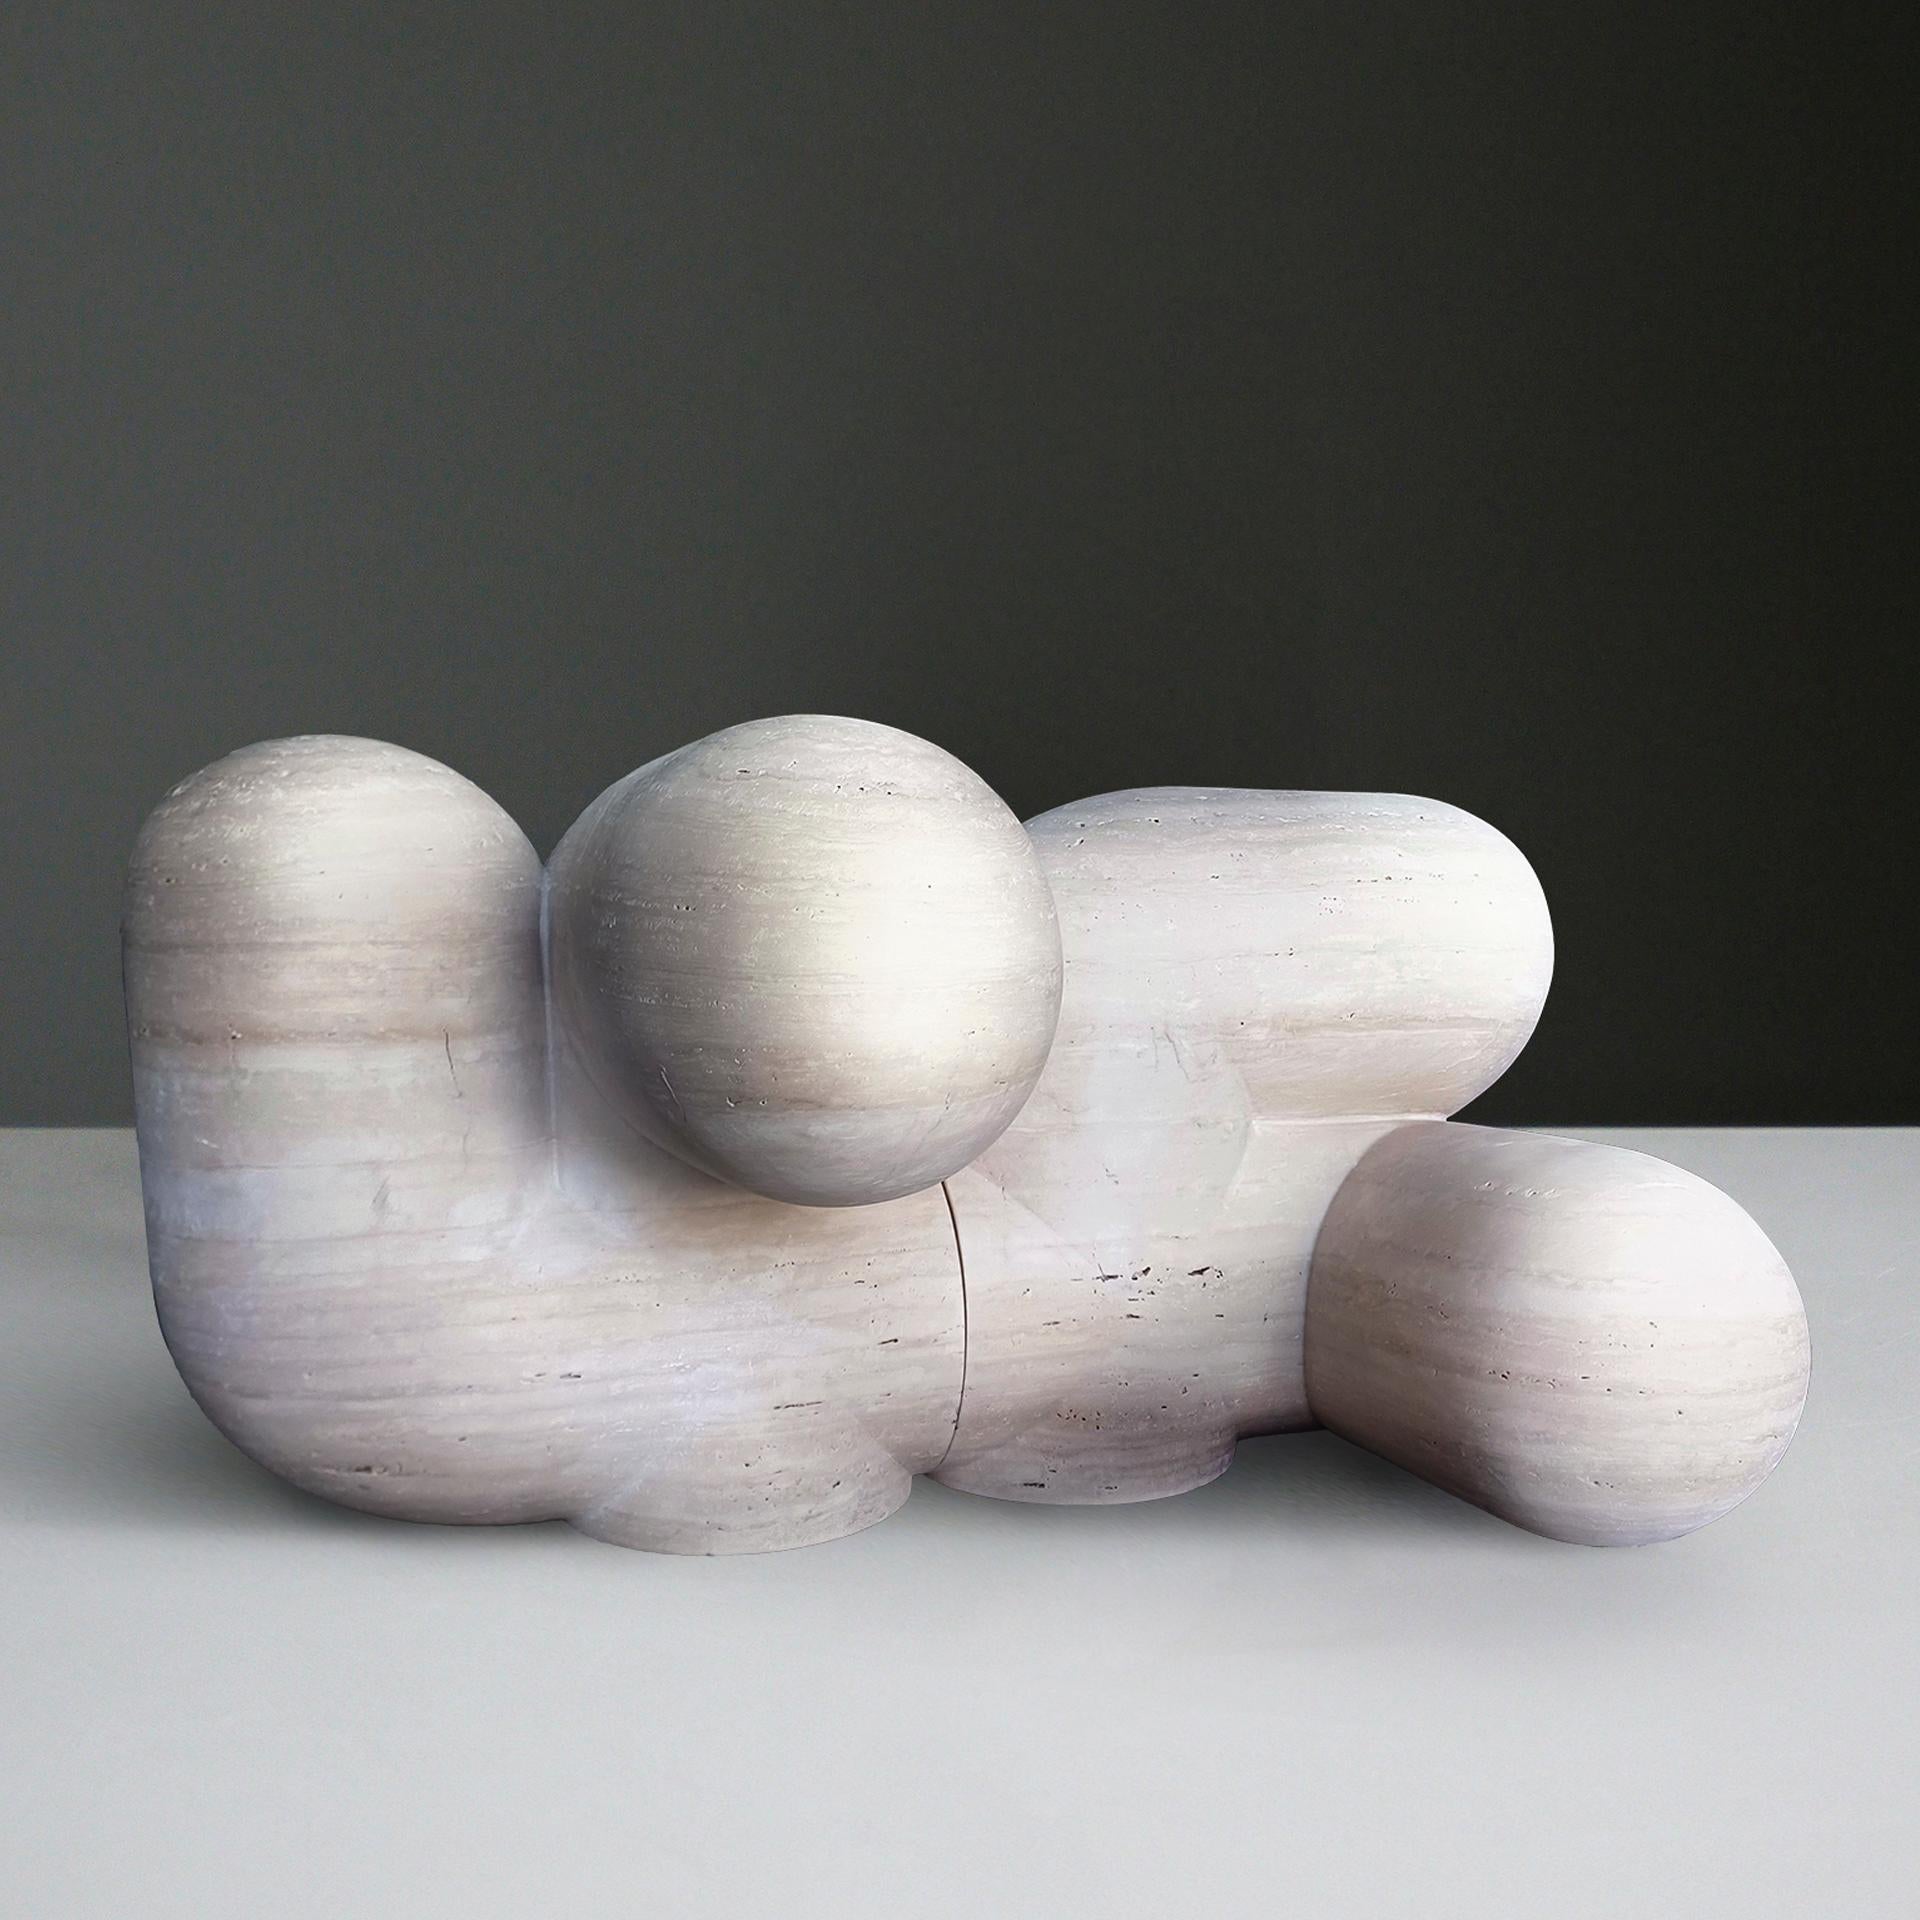 2lovers stool set by Pepe Guerrero. Composed of 2 sculptural pieces made in cream travertine with open pore. Limited edition #33. Signed and with serial number.

Feel the exclusivity of art in an immersive way through the most imposing piece. With a